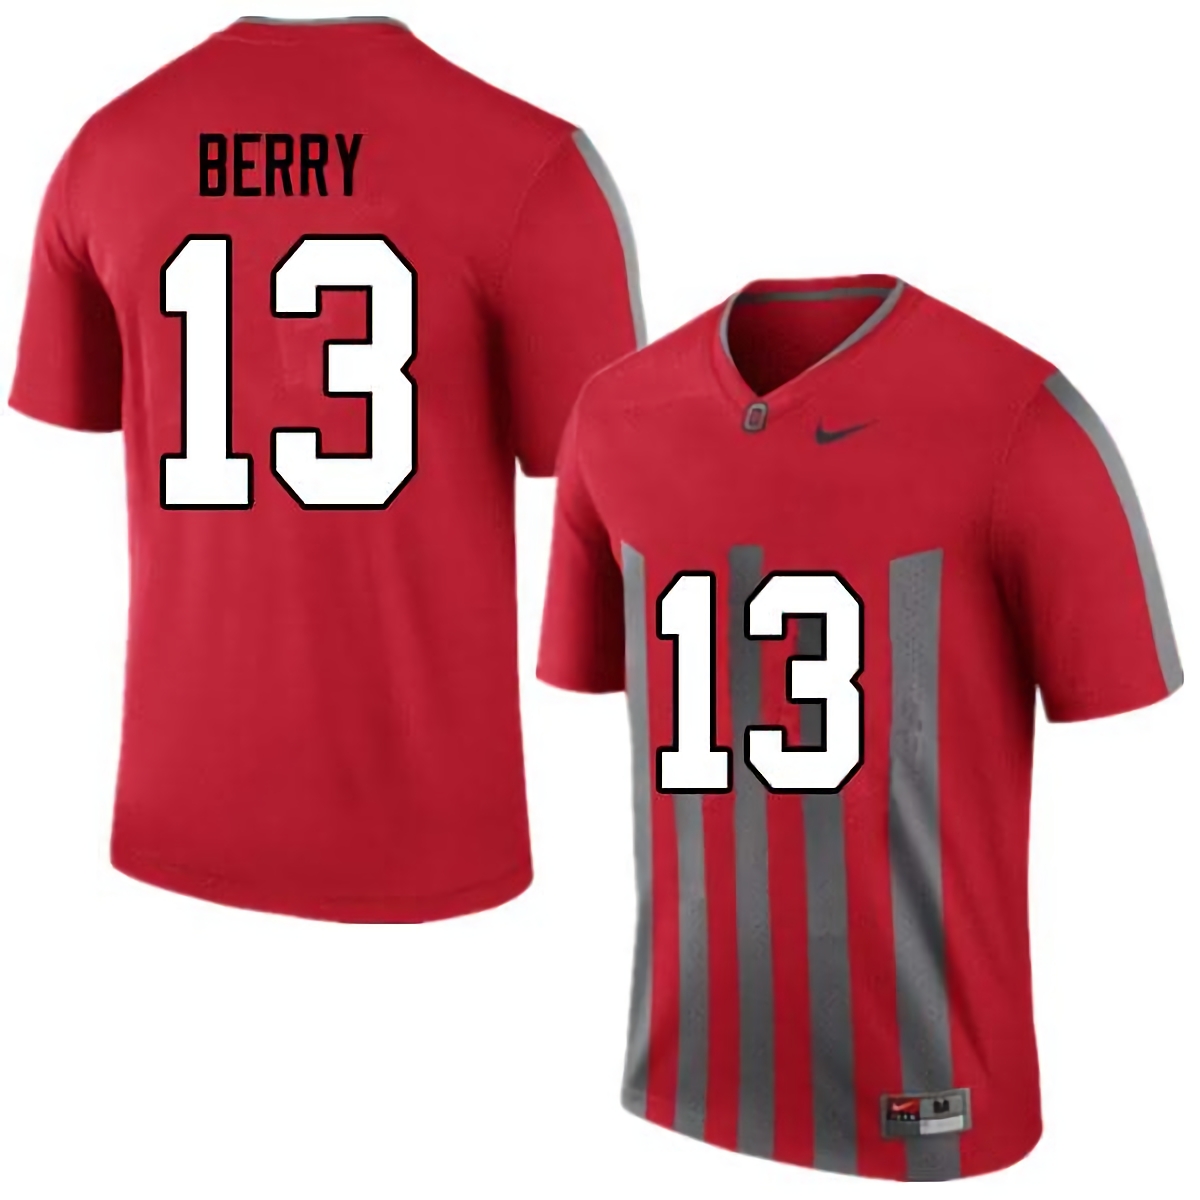 Rashod Berry Ohio State Buckeyes Men's NCAA #13 Nike Throwback Red College Stitched Football Jersey IHF8656WB